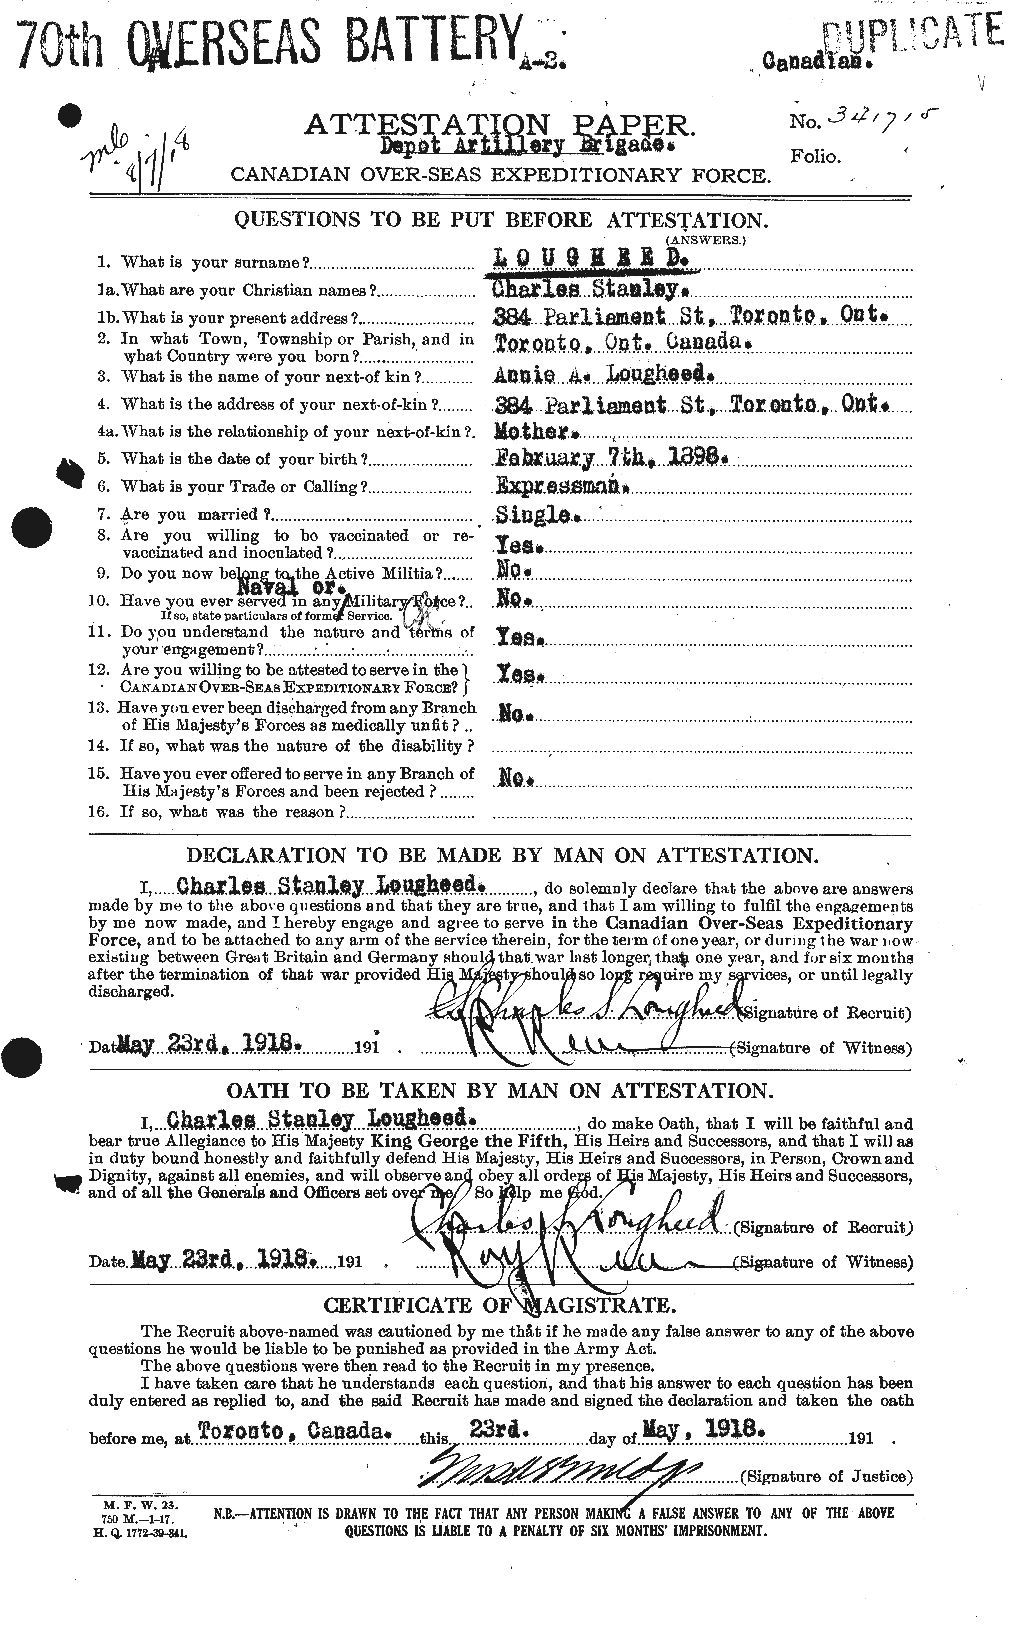 Personnel Records of the First World War - CEF 470386a